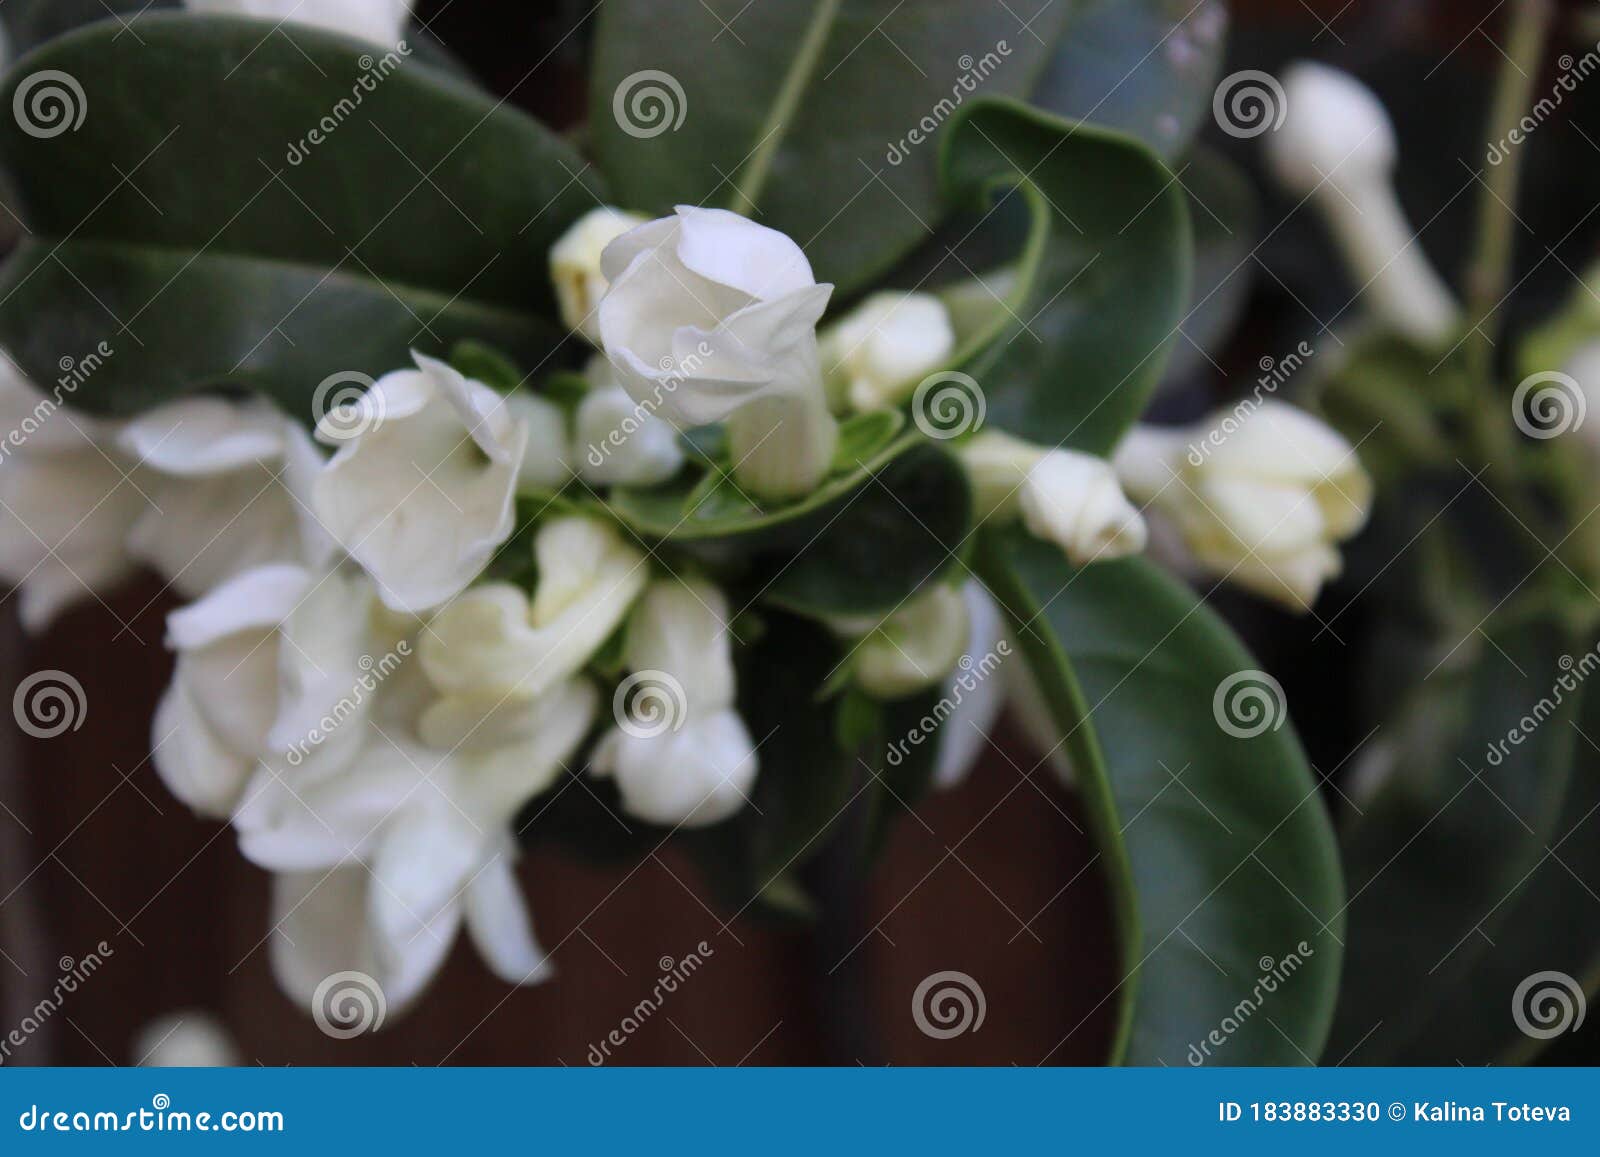 jasmin`s flowers, touch of spring